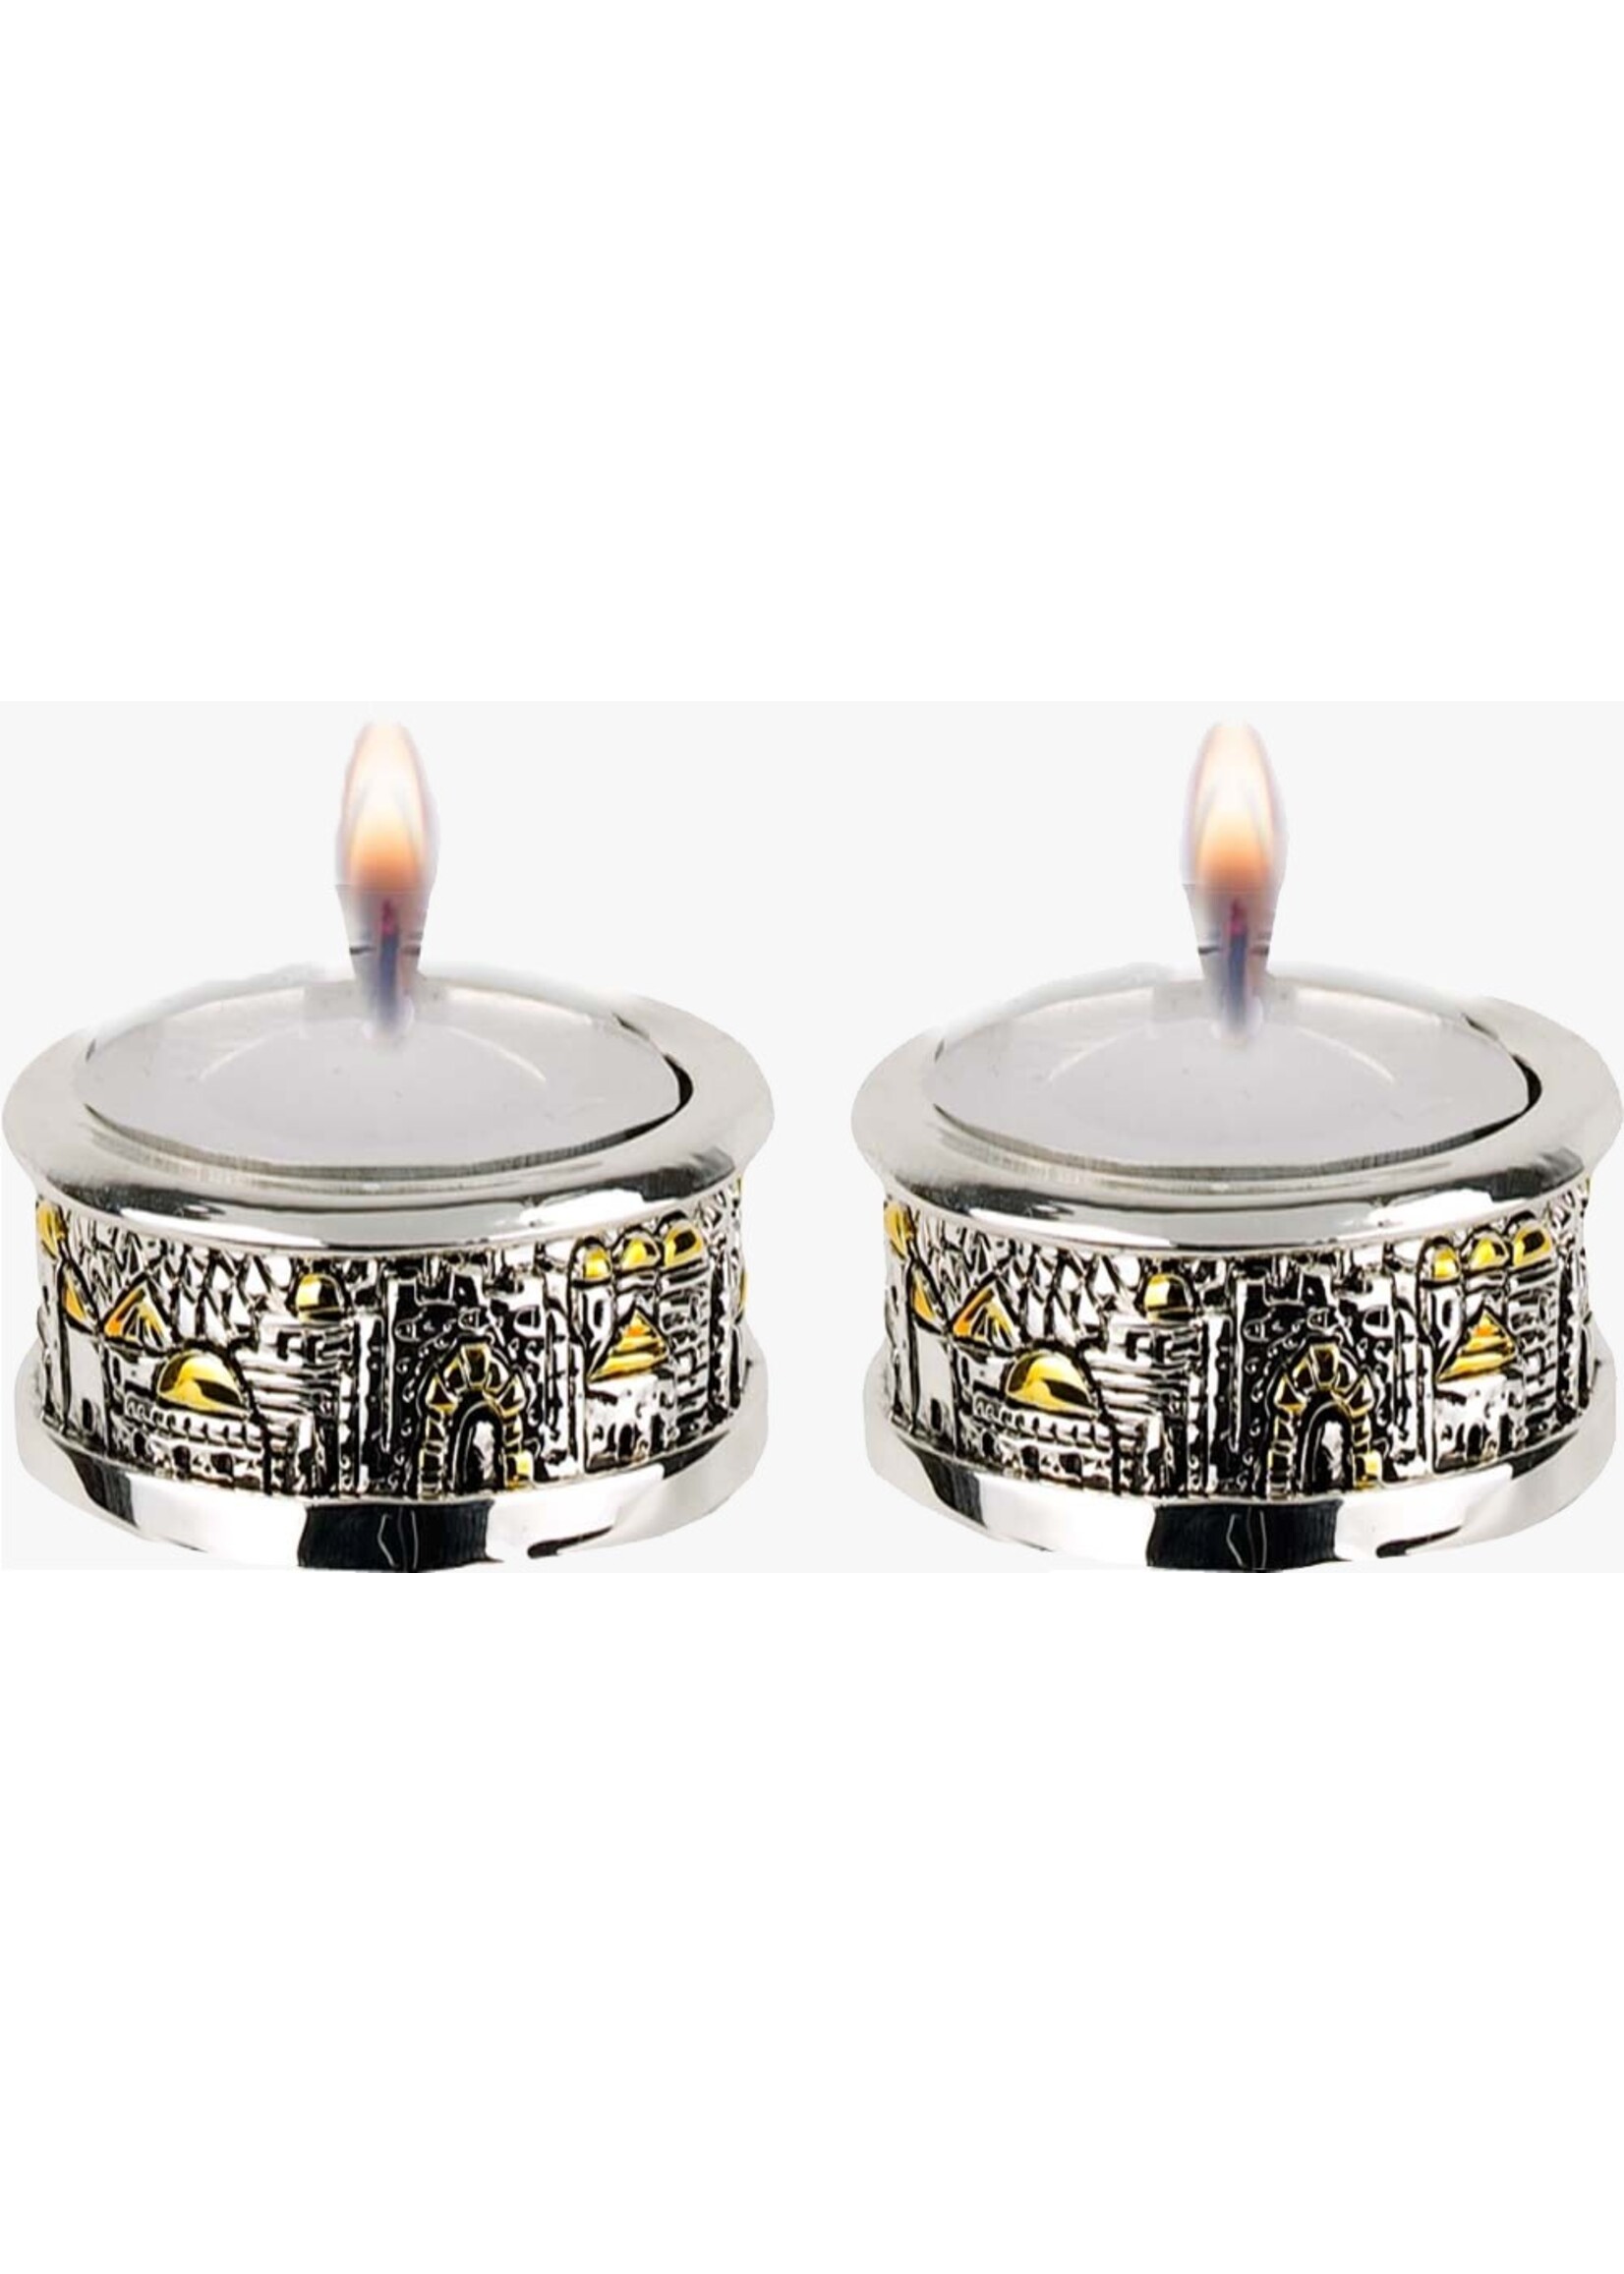 CANDLE HOLDERS CYLINDER SILVER PLATED